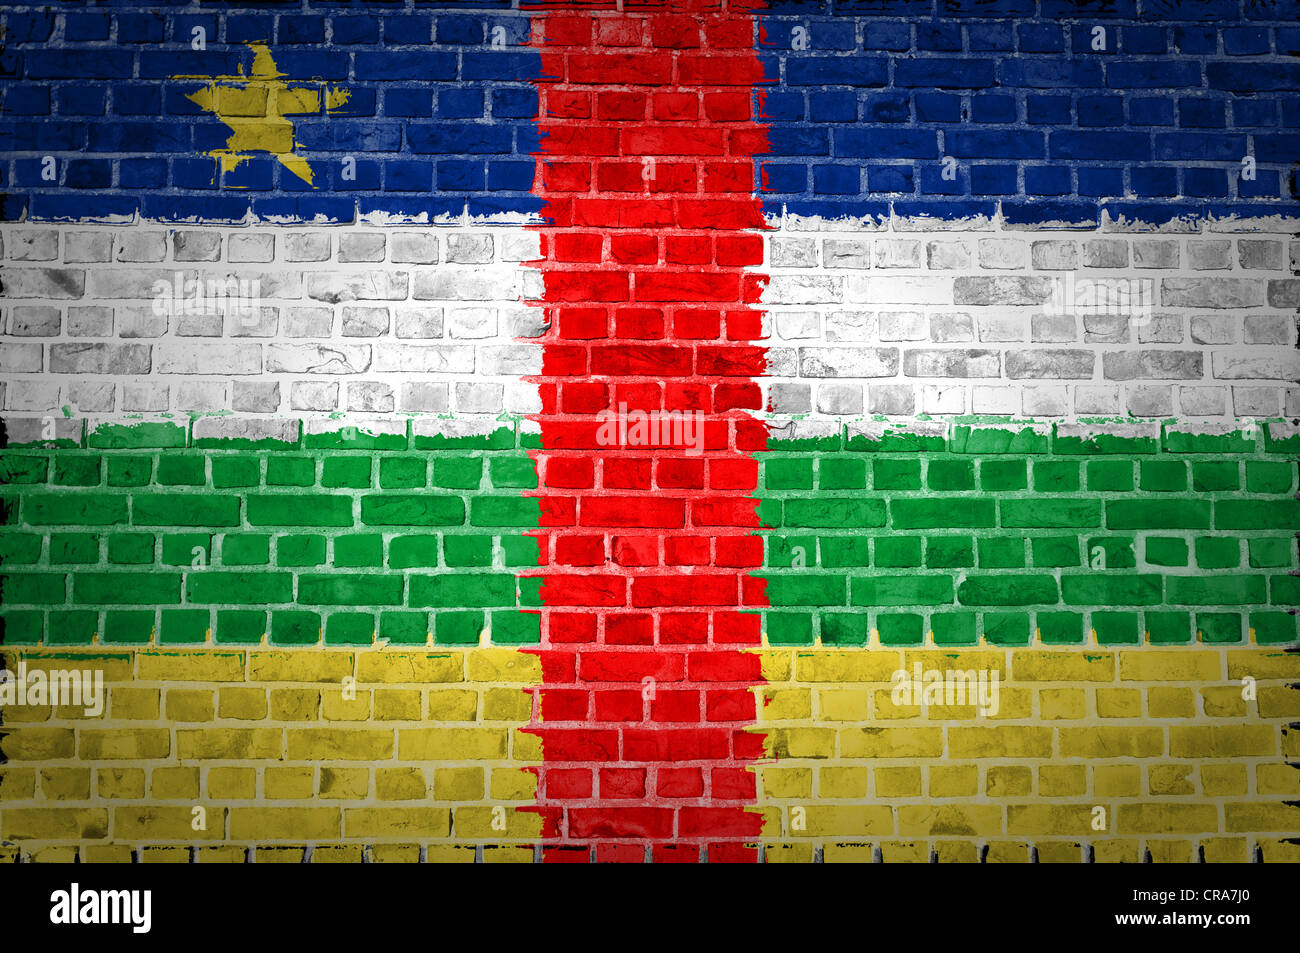 An image of the Central African Republic flag painted on a brick wall in an urban location Stock Photo